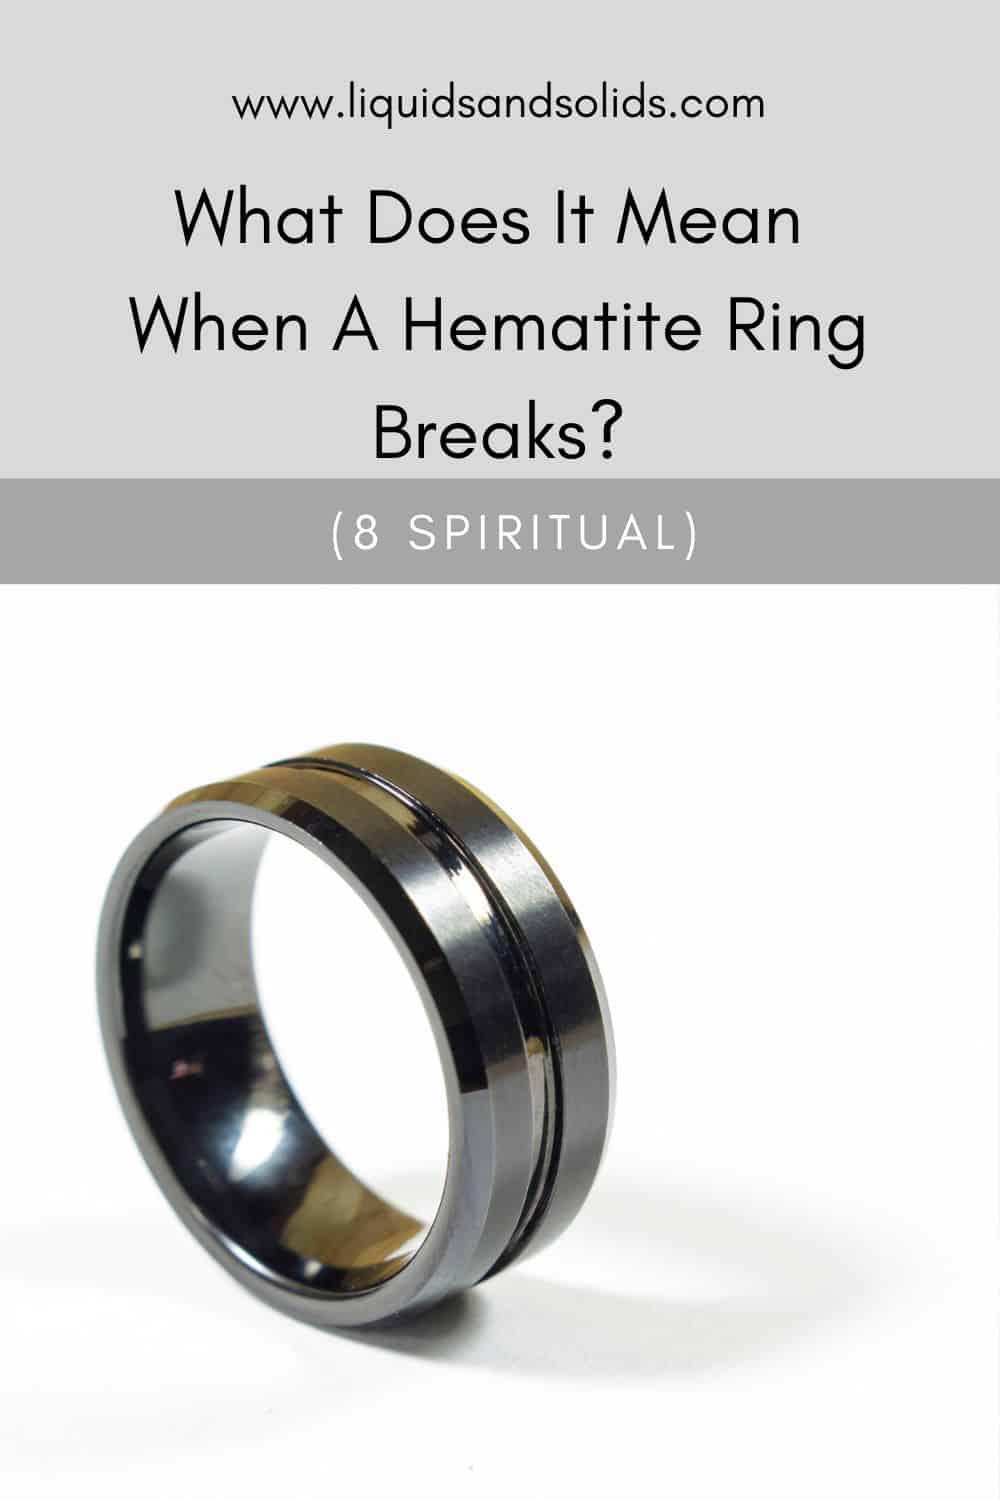 What Does It Mean When A Hematite Ring Breaks? (8 Spiritual)